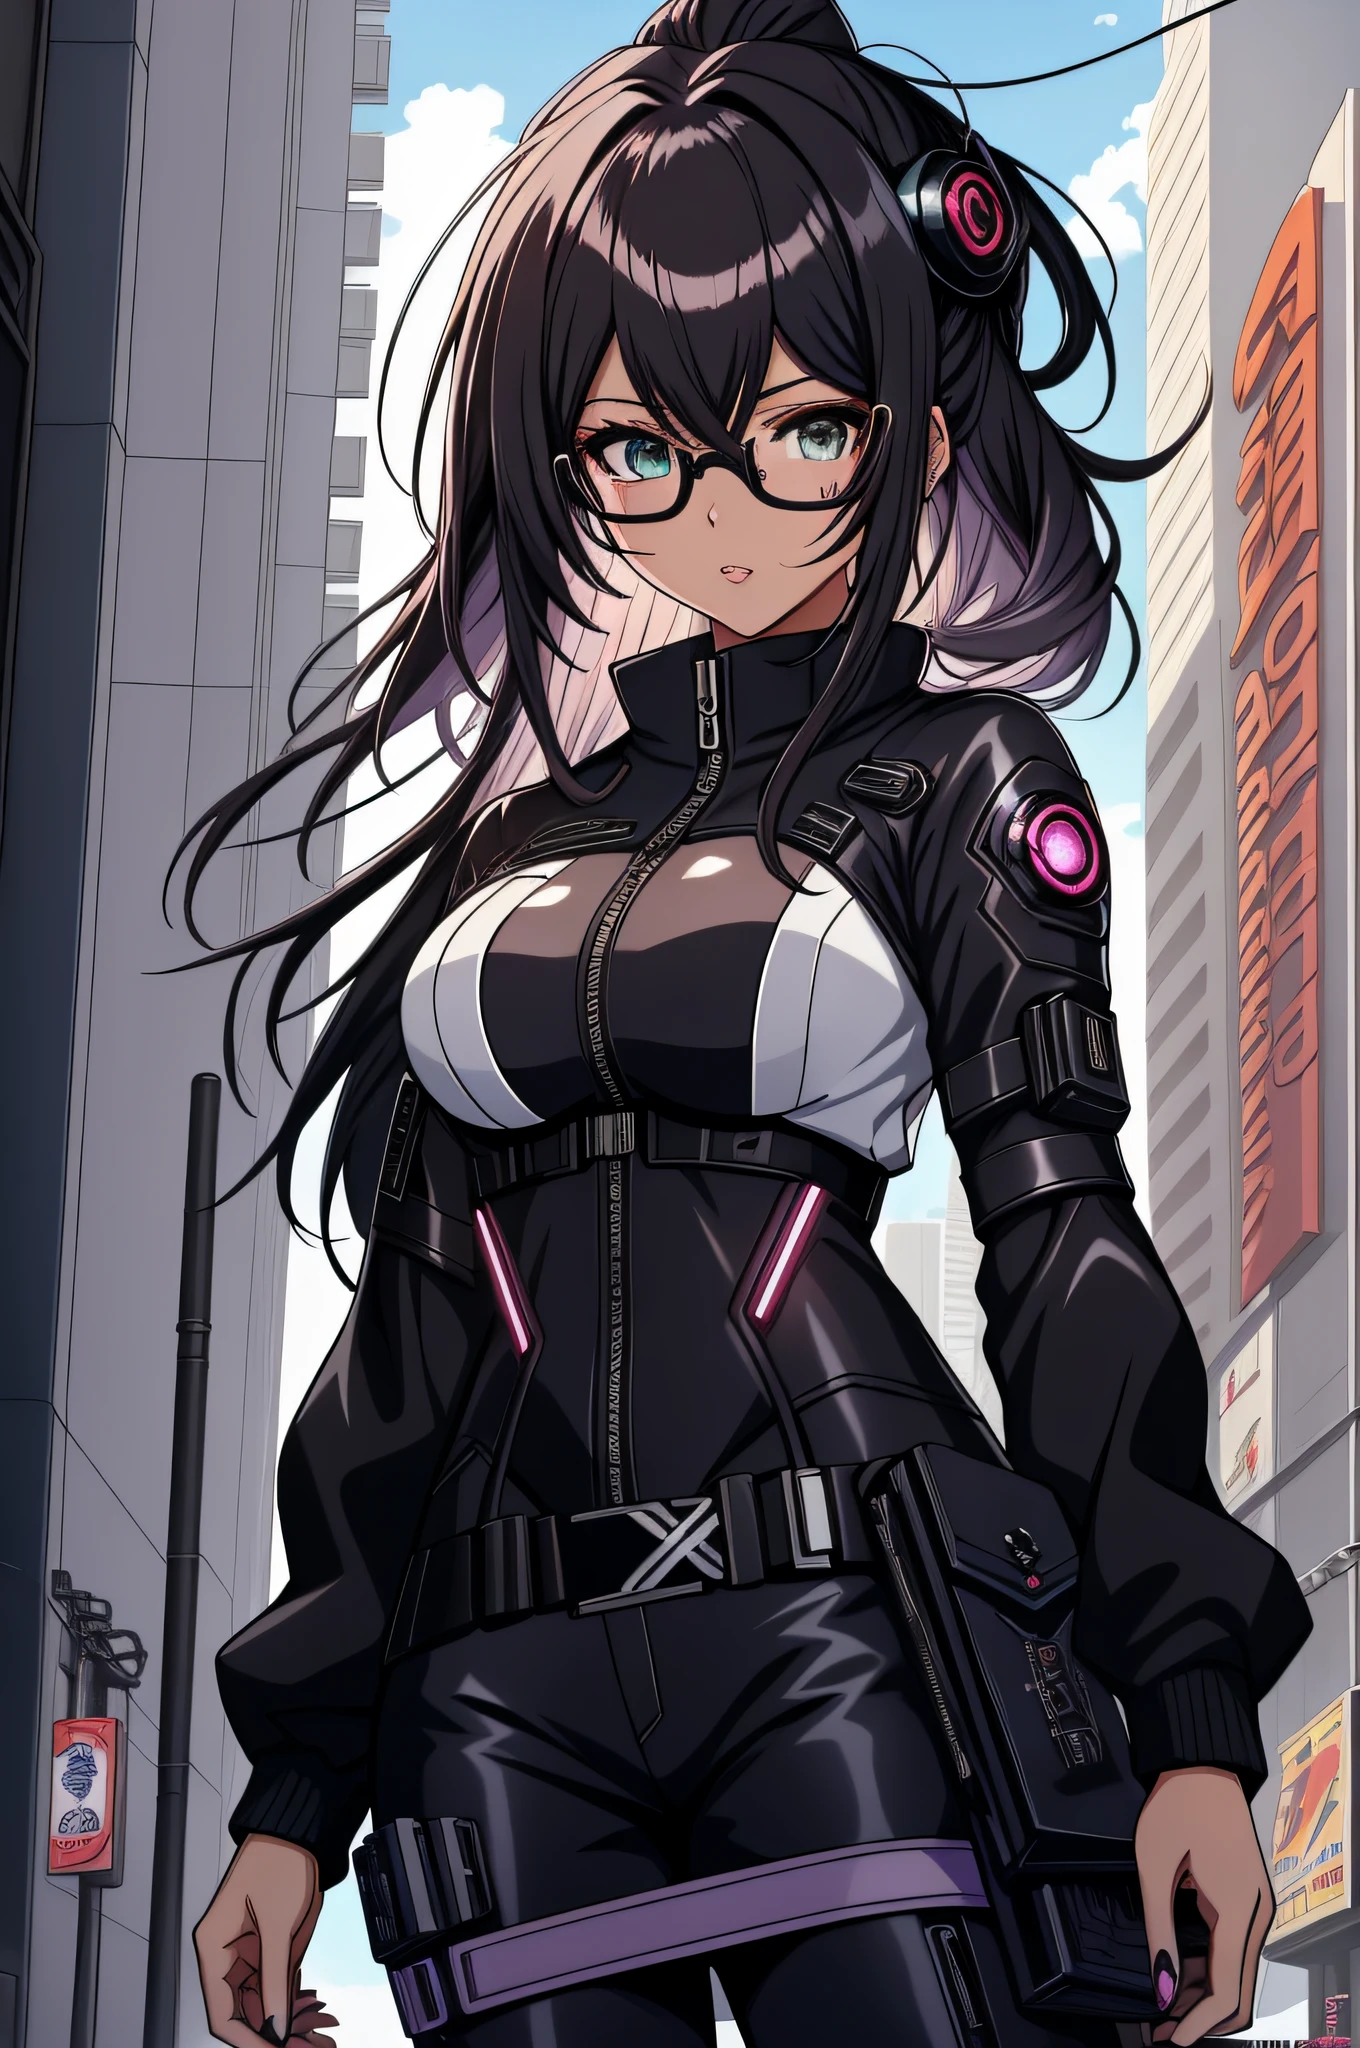 Anime - imagem de estilo 1mulher com olhos azuis e Bblack hair, Bblack hair, thick eyebrow, face of a 27 year old woman, 27 year old young man, cloused mouth, fully body, cyberpunk anime art, (cloused mouth: 1.5), (double eyelid), (Bblack hair: 1.3), (shorth hair: 1.3), wearing dress, digital cyberpunk anime art, cyberpunk anime art, range murata and artgerm, eyeglass, futuristic clothing, (whole body: 1.7), wearing dress, stylish pants, Technological dress, transparent spectacle lenses, 极其详细的Artgerm, modern cyberpunk anime, artgerm and atey ghailan, artgerm and genzoman, cloused mouth